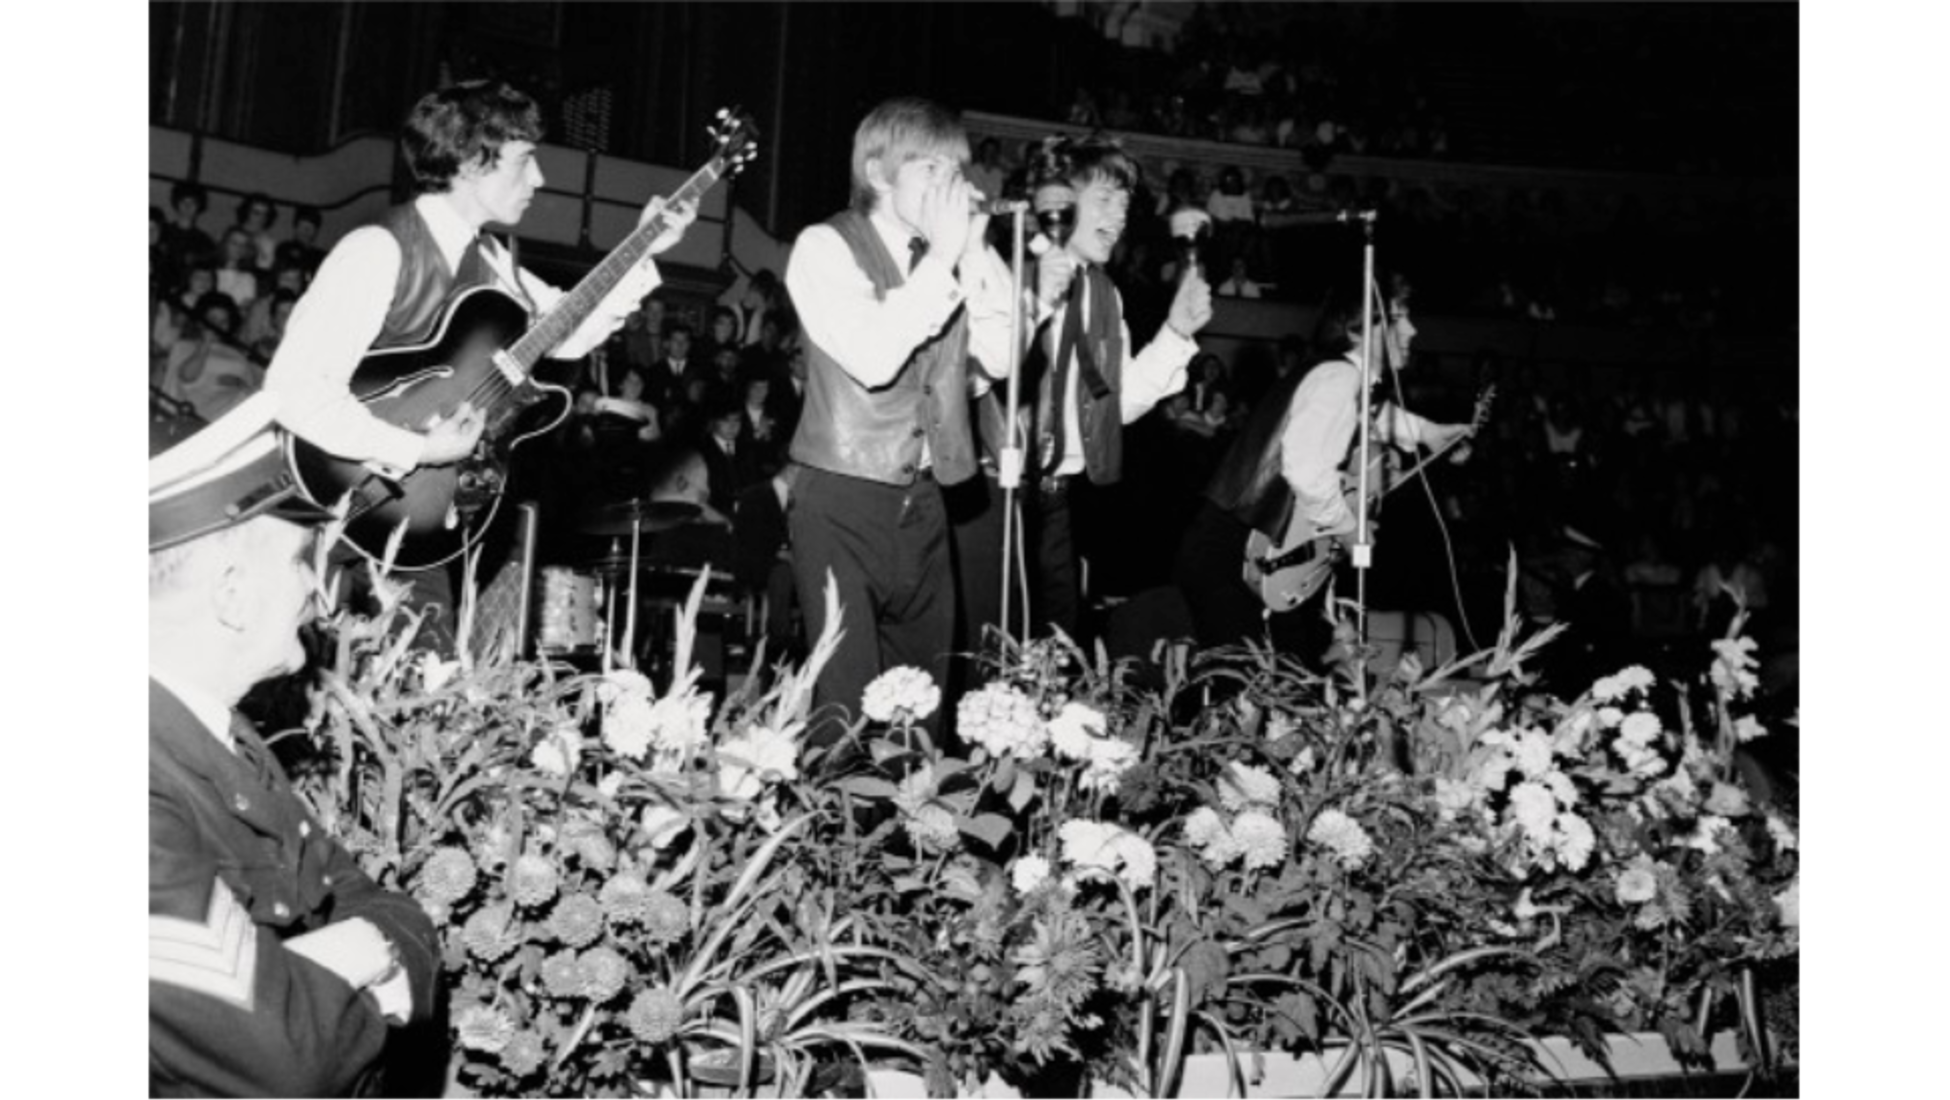 50 Years Ago Today, the Rolling Stones Played Their First Gig